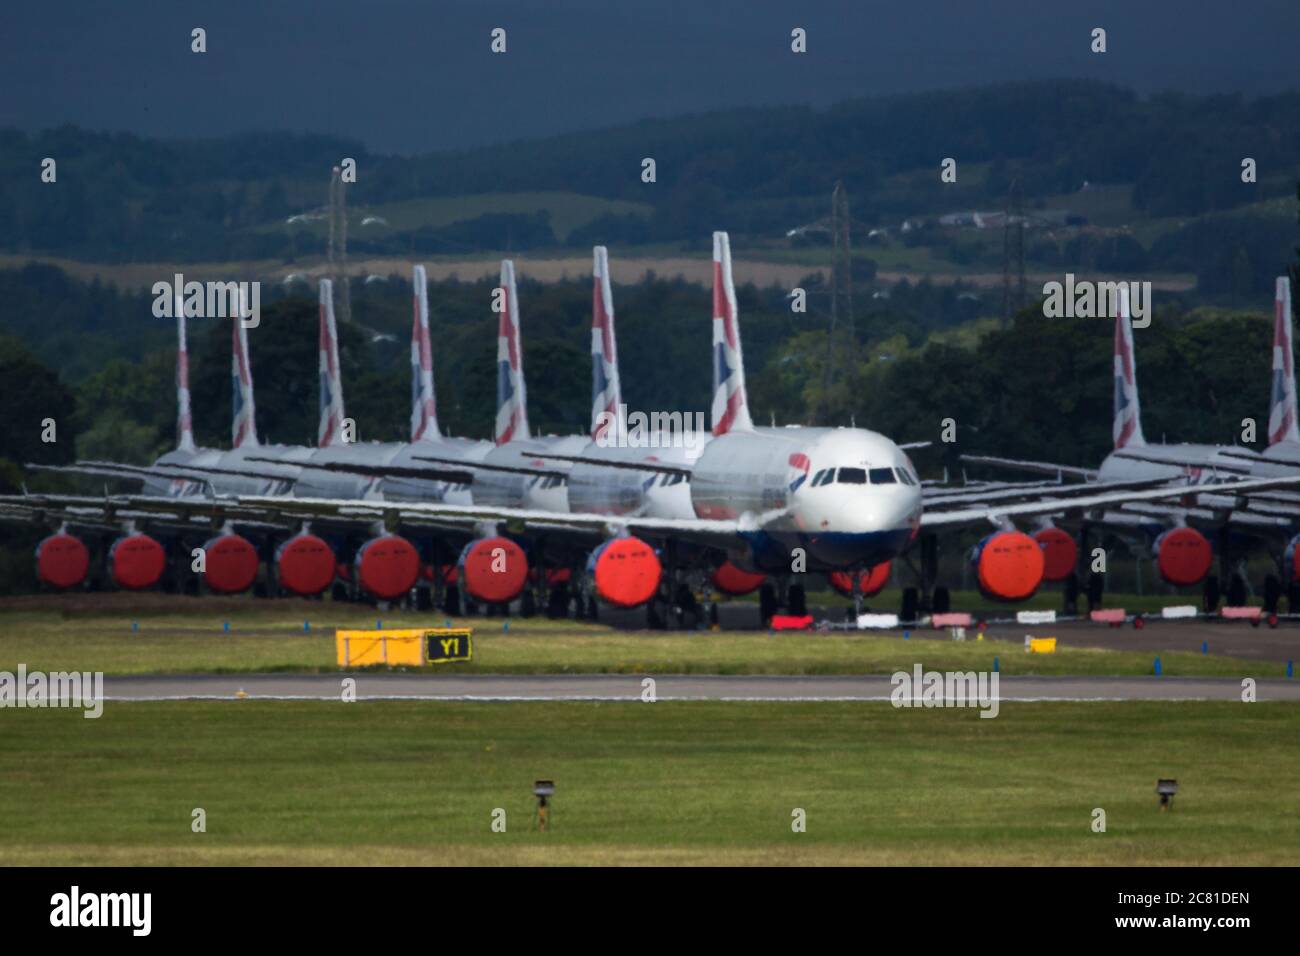 Glasgow, Scotland, UK. 20 July 2020 Pictured: Grounded BA jets at Glasgow Airport. Since March, all flights in and out of the UK were grounded the UK went into lockdown following a sharp rise in coronavirus cases in Europe. On July 6, many flights resumed, although the Foreign Commonwealth Office advised travel only where absolutely necessary. According to new terms currently being drafted between the British Airline Pilots' Association (BALPA) and British Airways, captains and first officers placed in the pool will remain on half-pay until they are needed. Credit: Colin Fisher/Alamy Live News Stock Photo